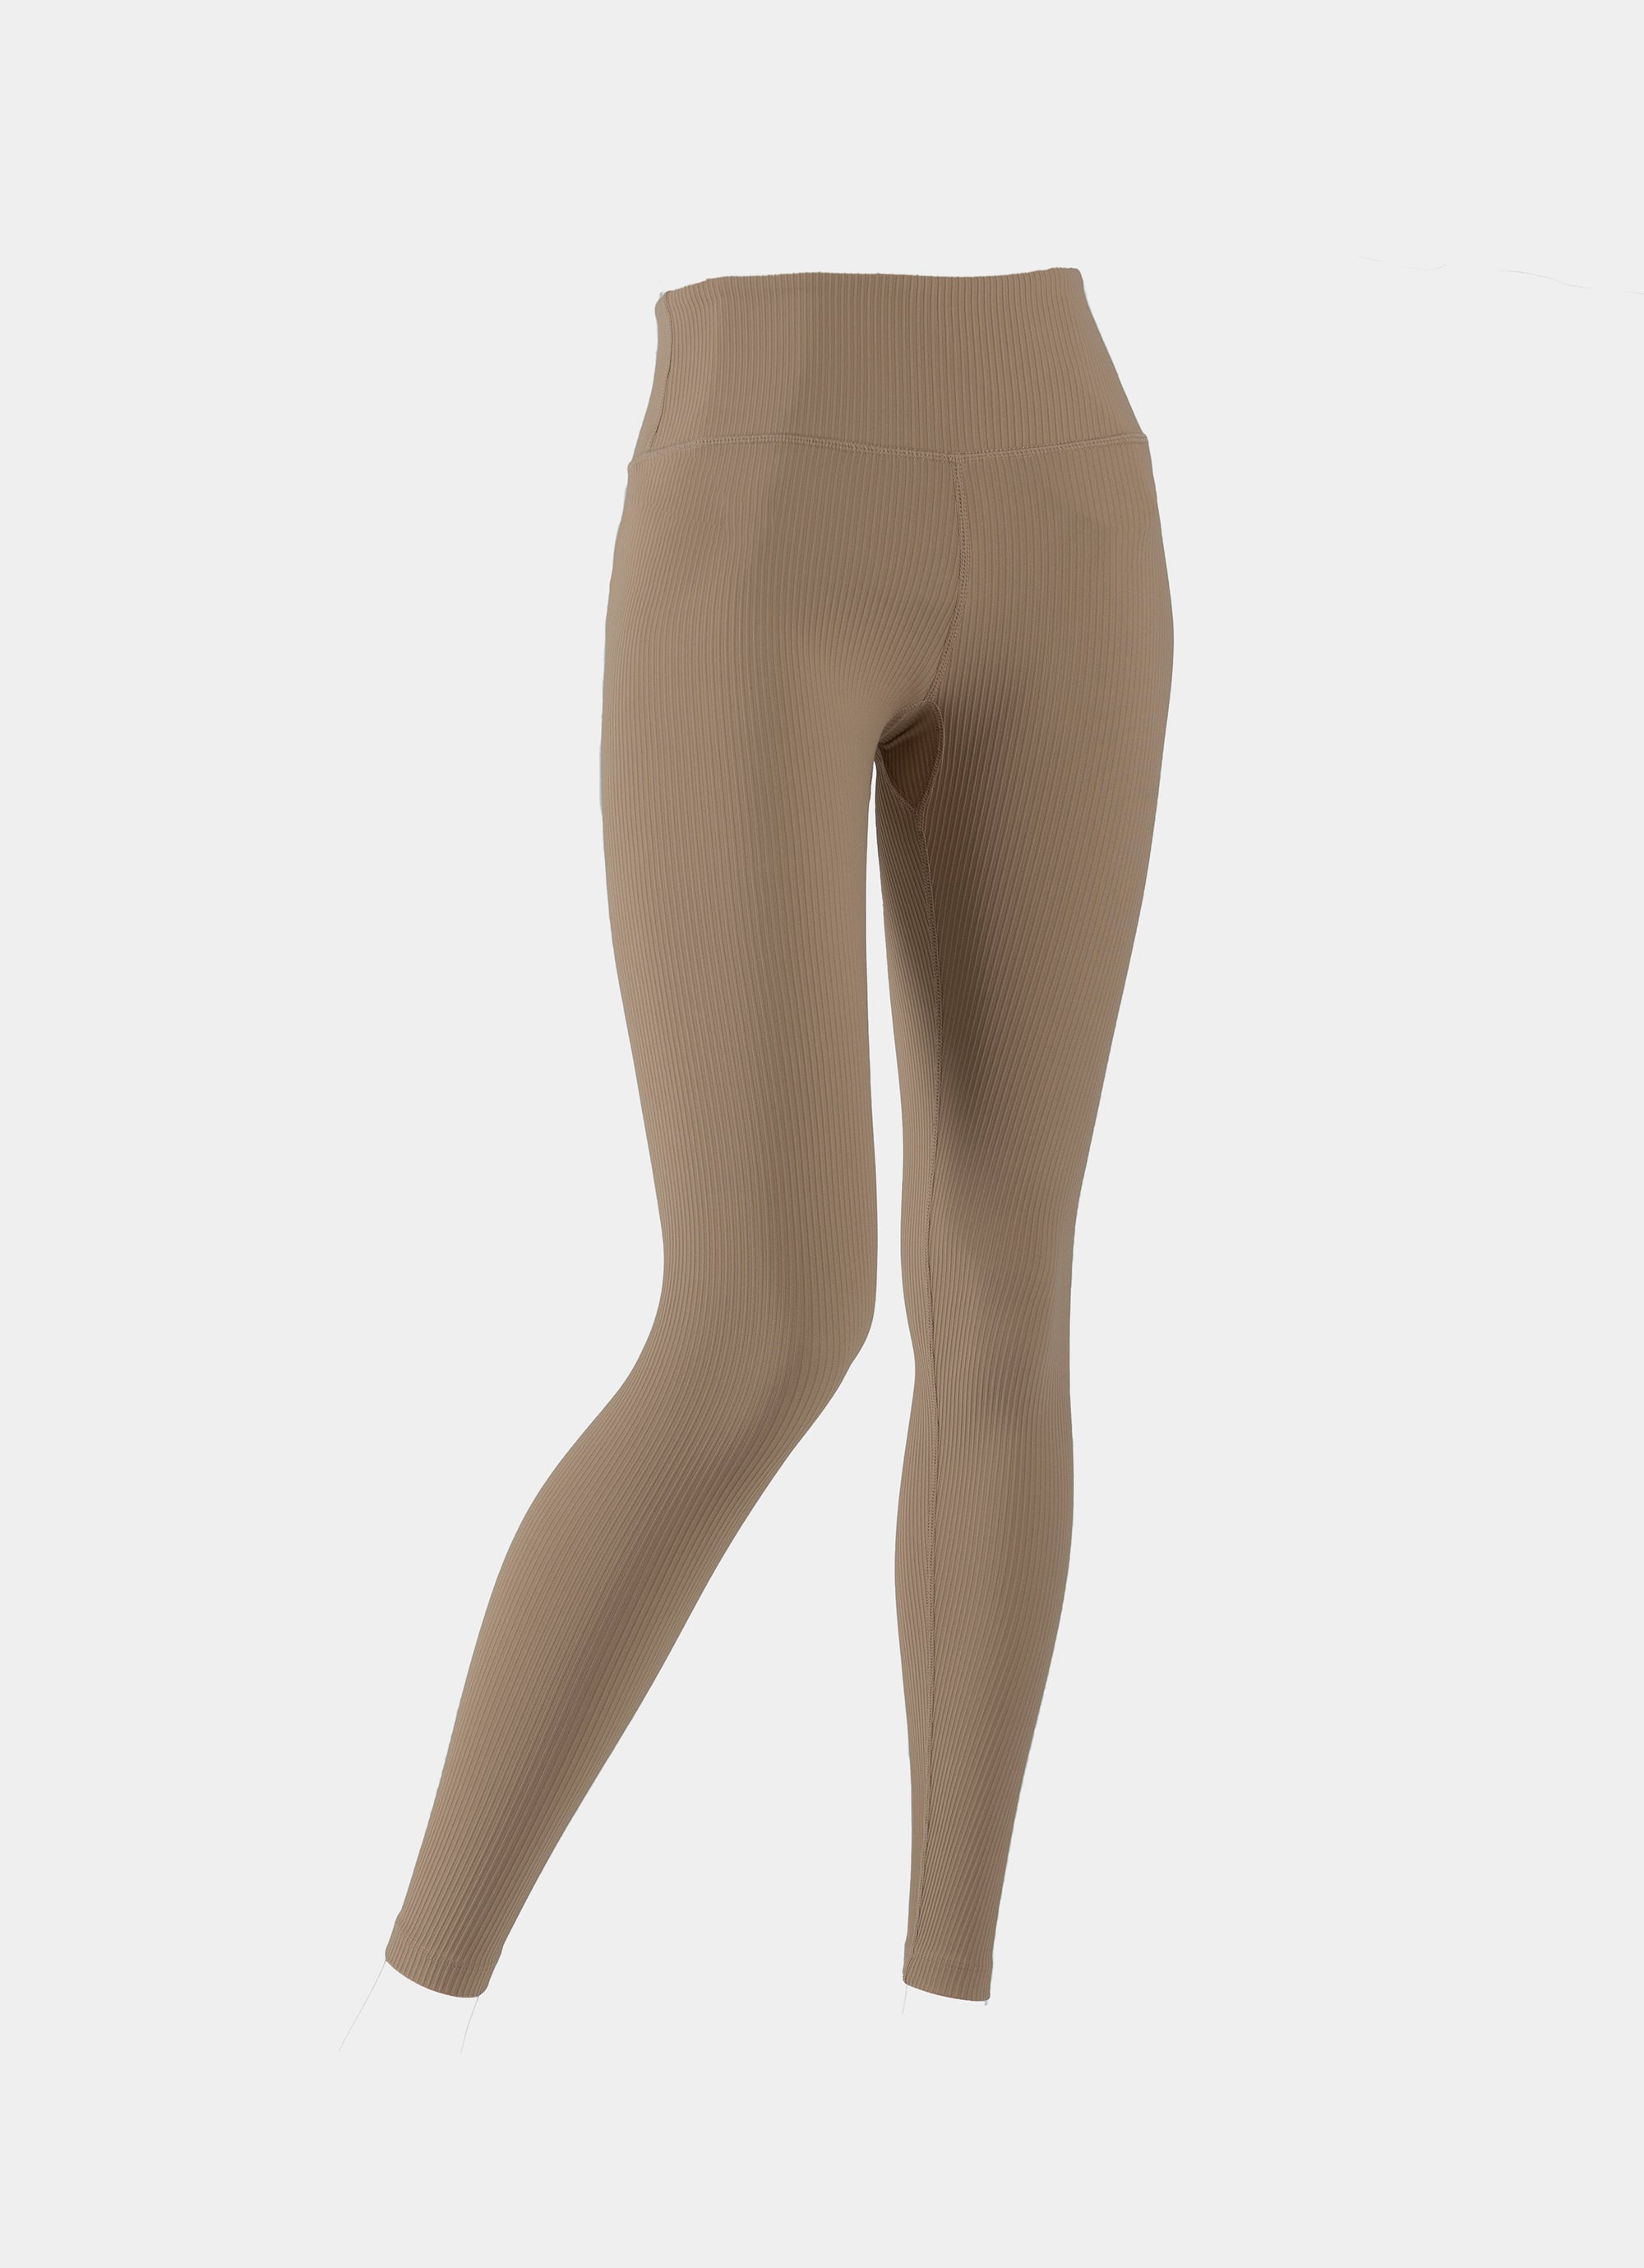 https://www.redrat.co.nz/content/products/stryde-amber-ribbed-leggings-sand-back-detail-54016.jpg